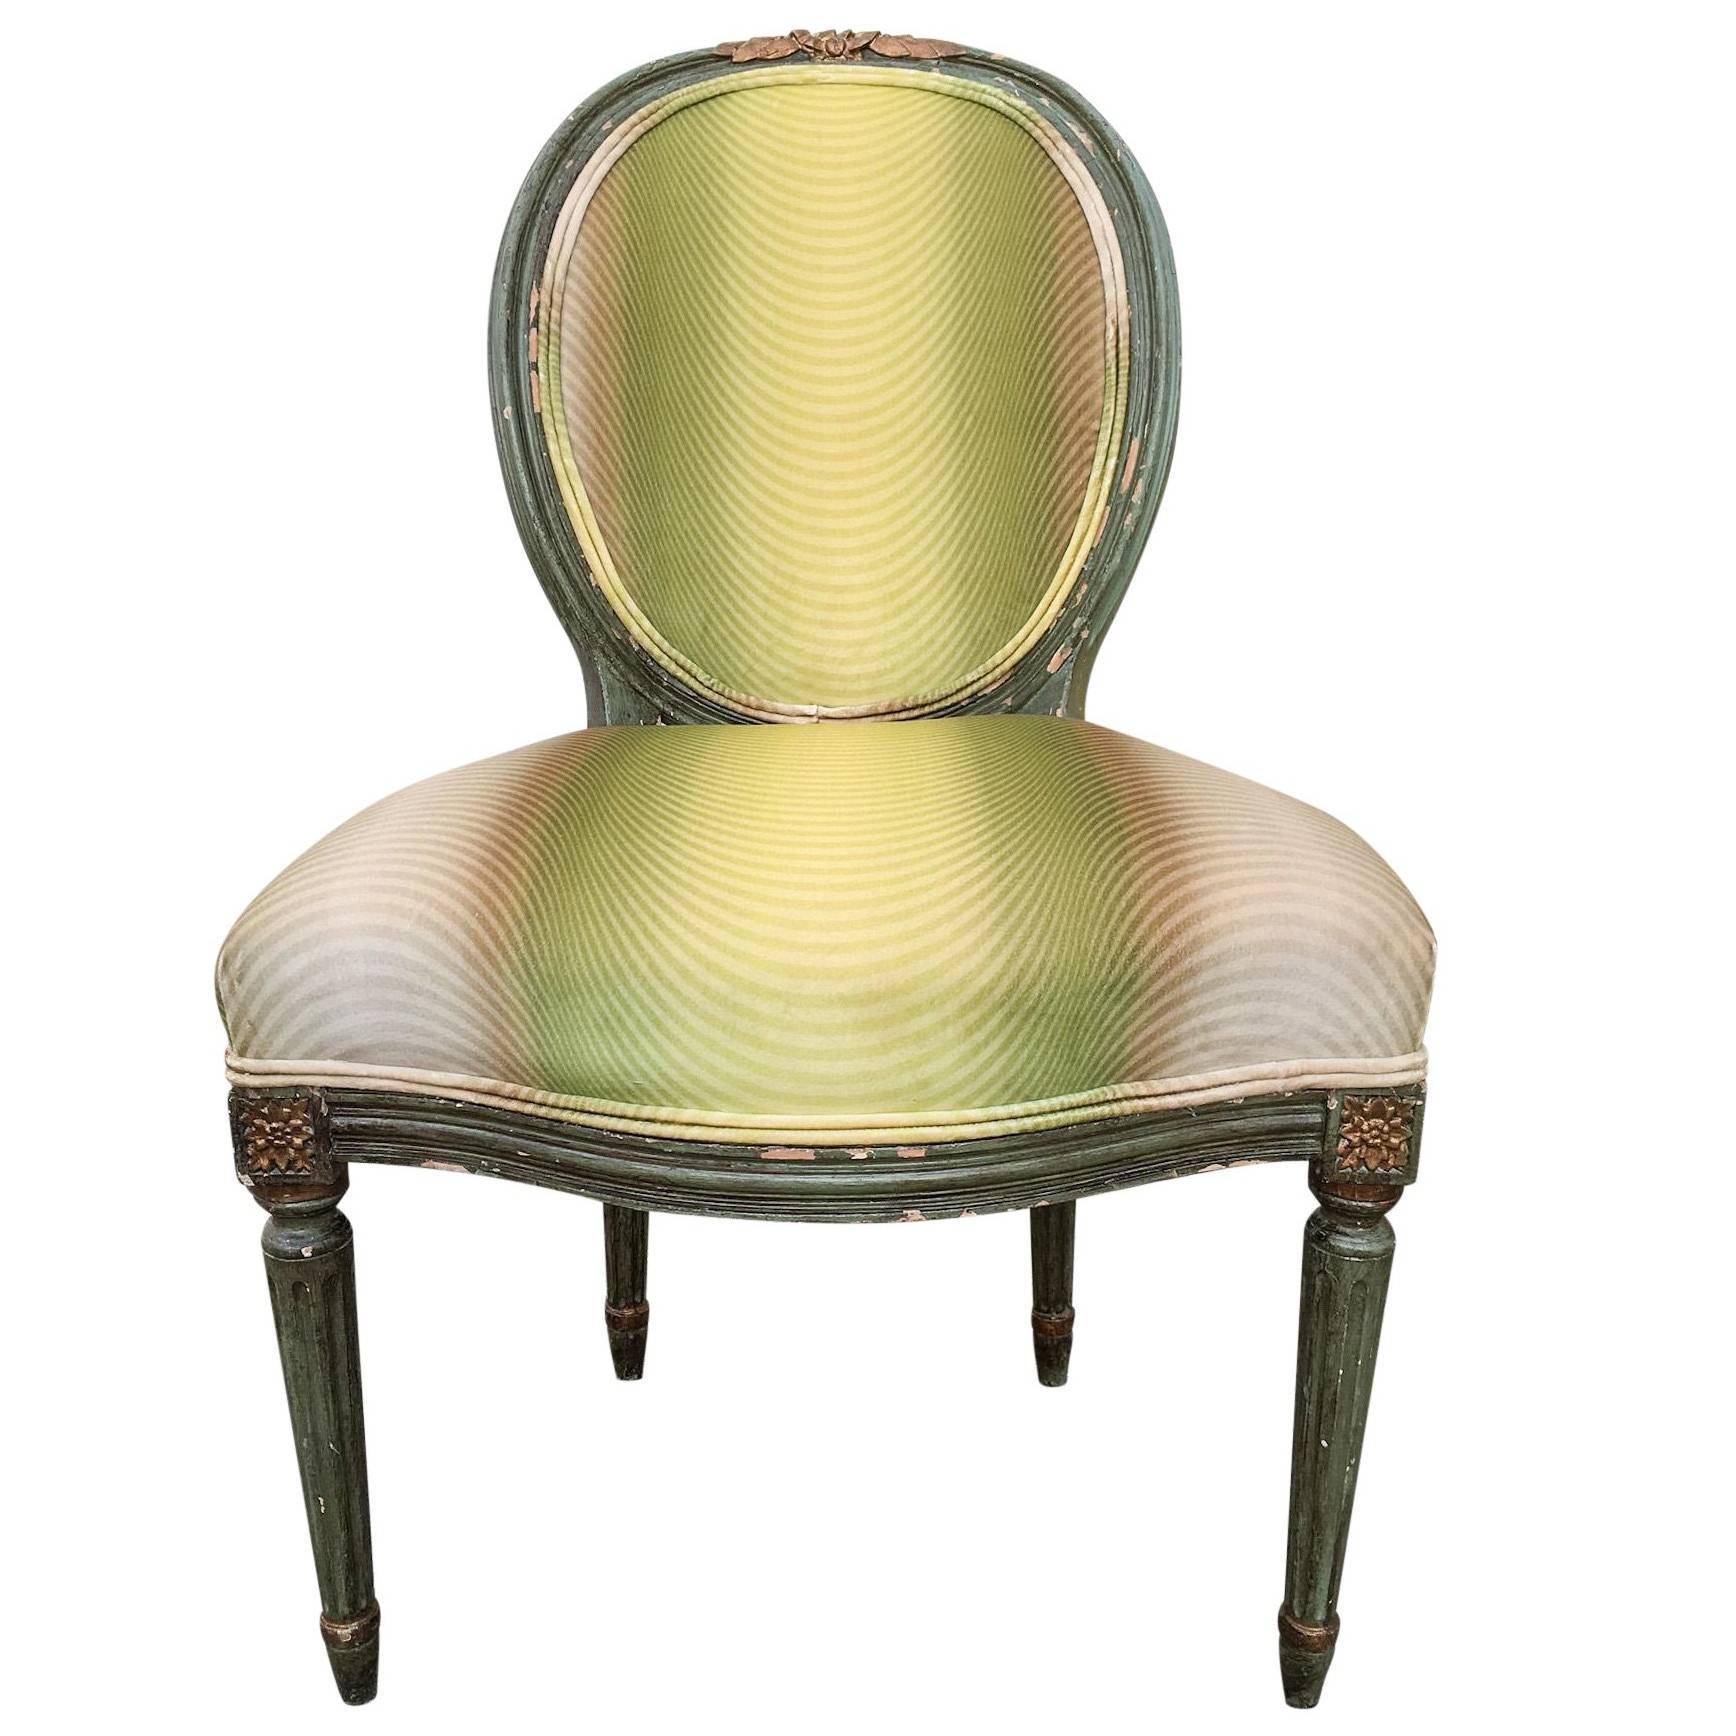 19th Century French Fauteuil Chair with Green Ombre Velvet by Vervain